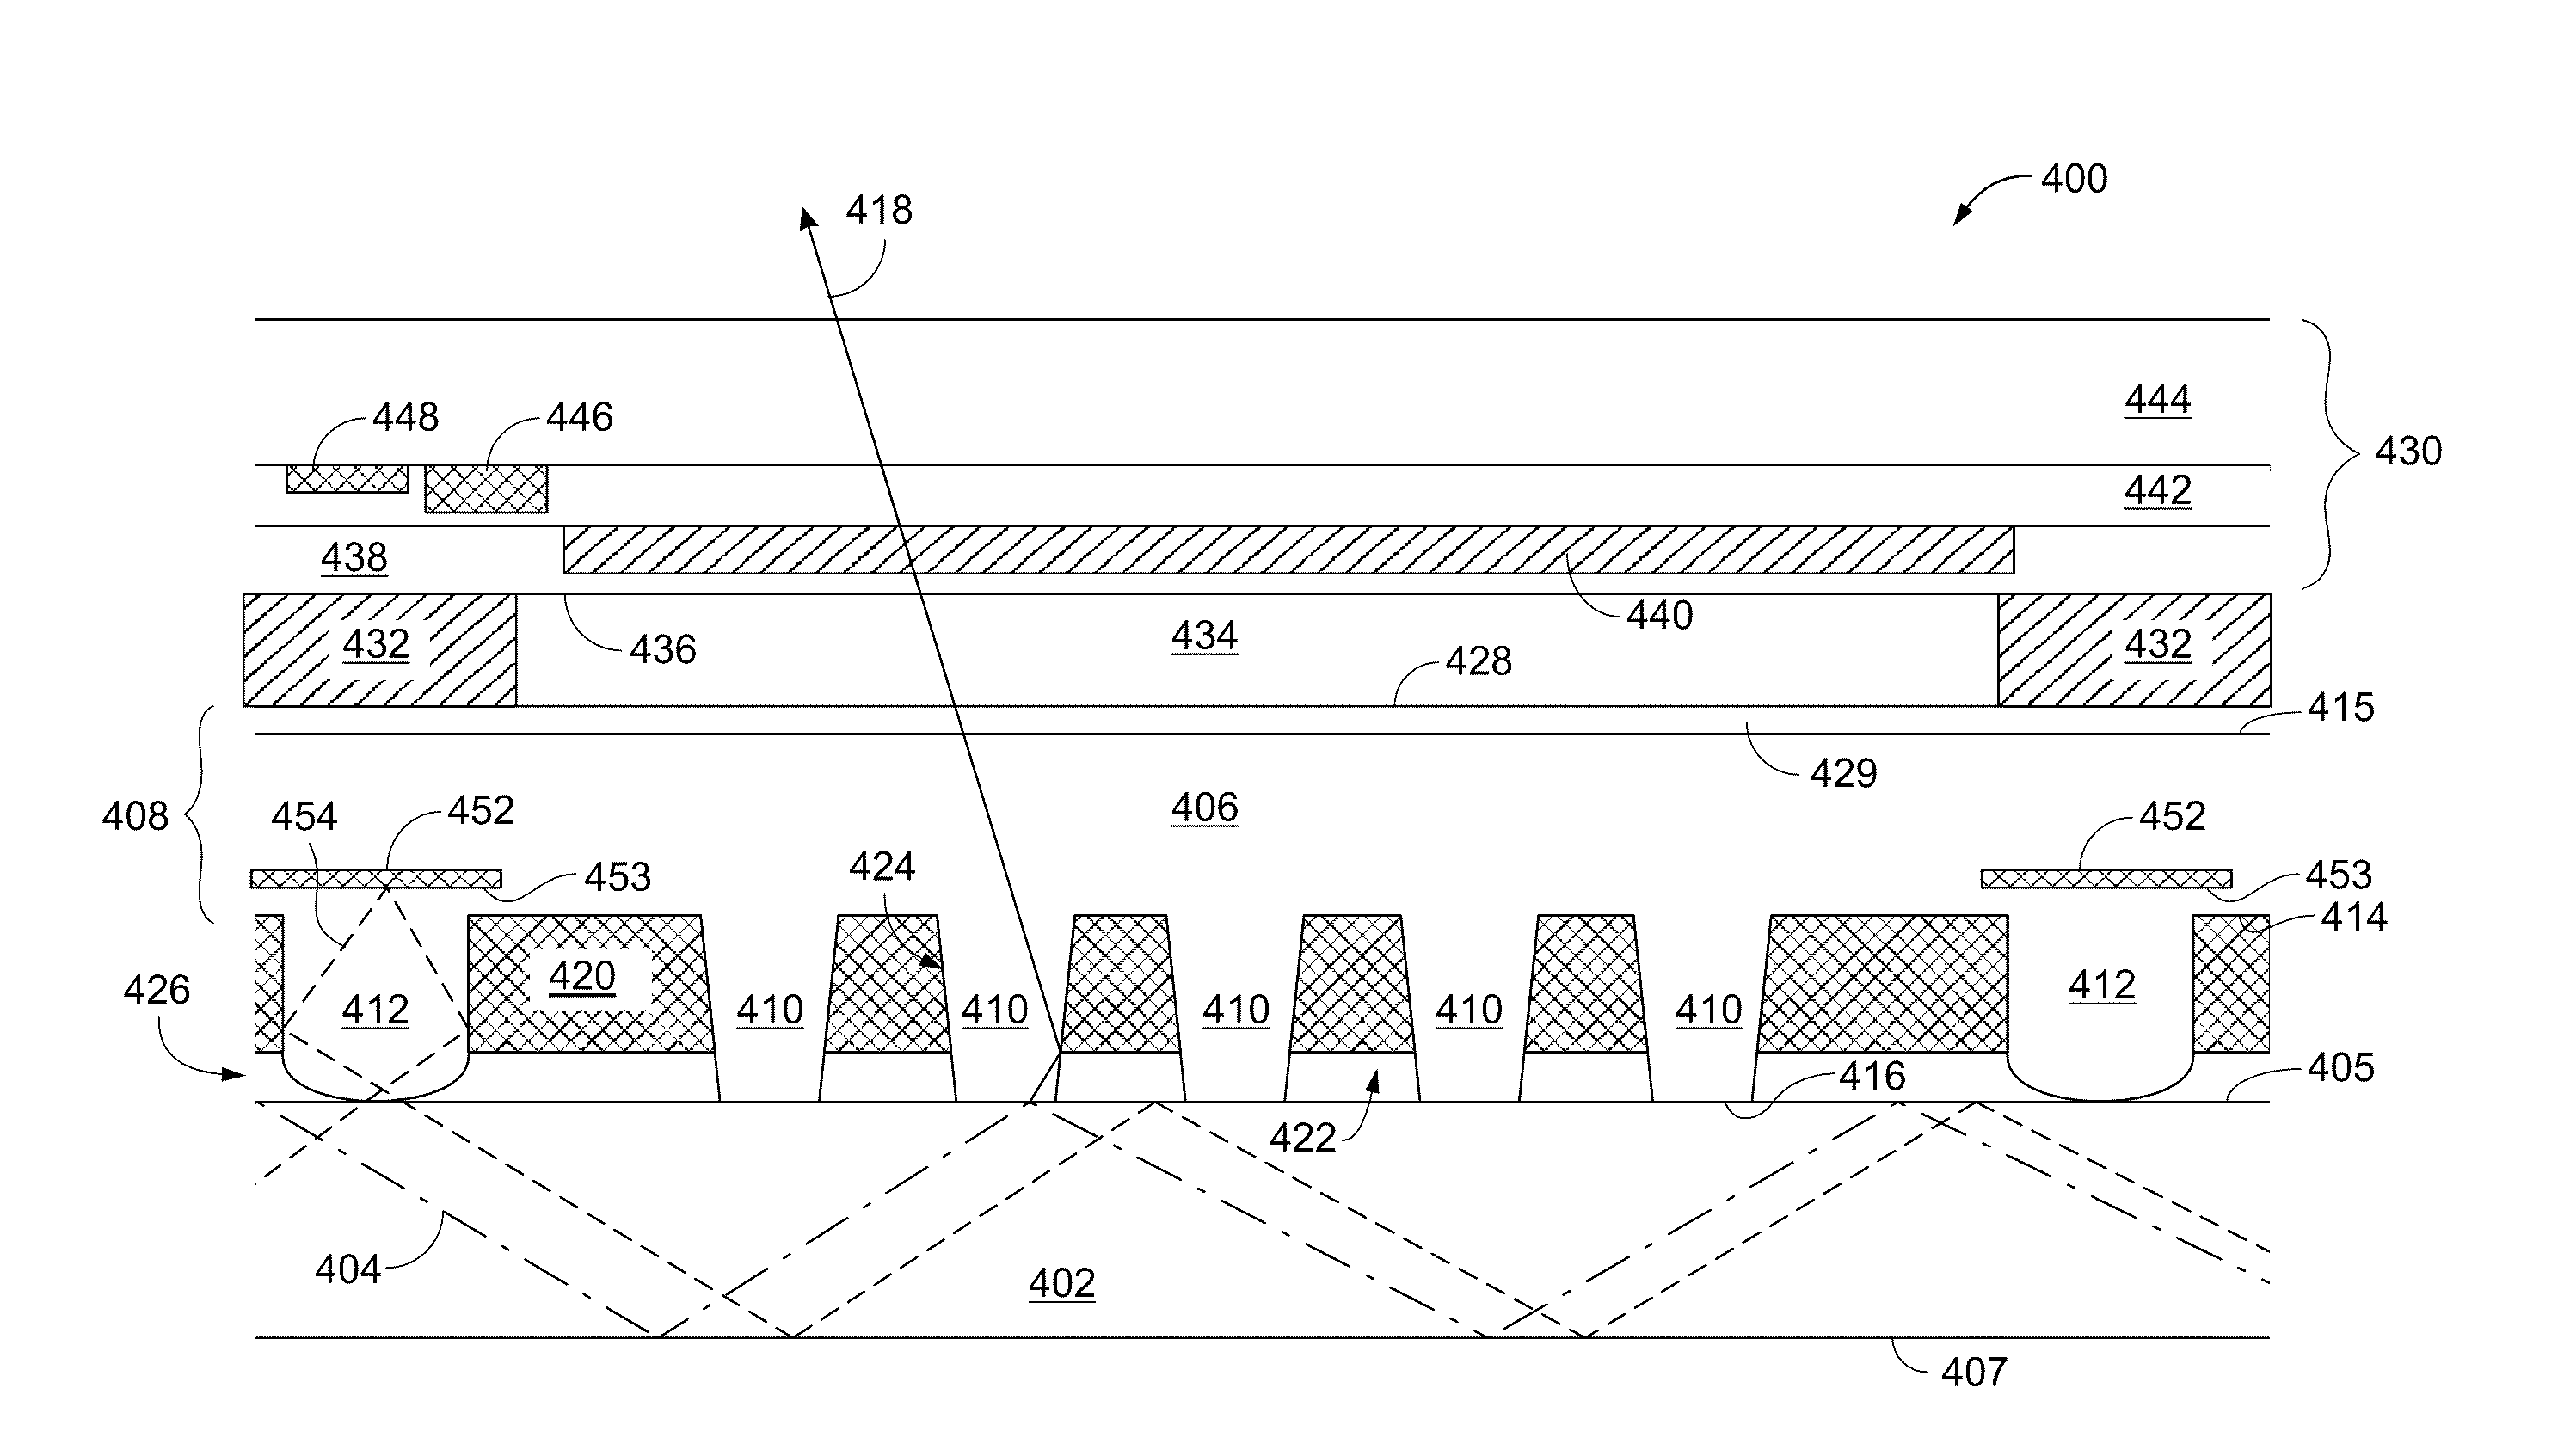 Normally emitting pixel architecture for frustrated total internal reflection displays